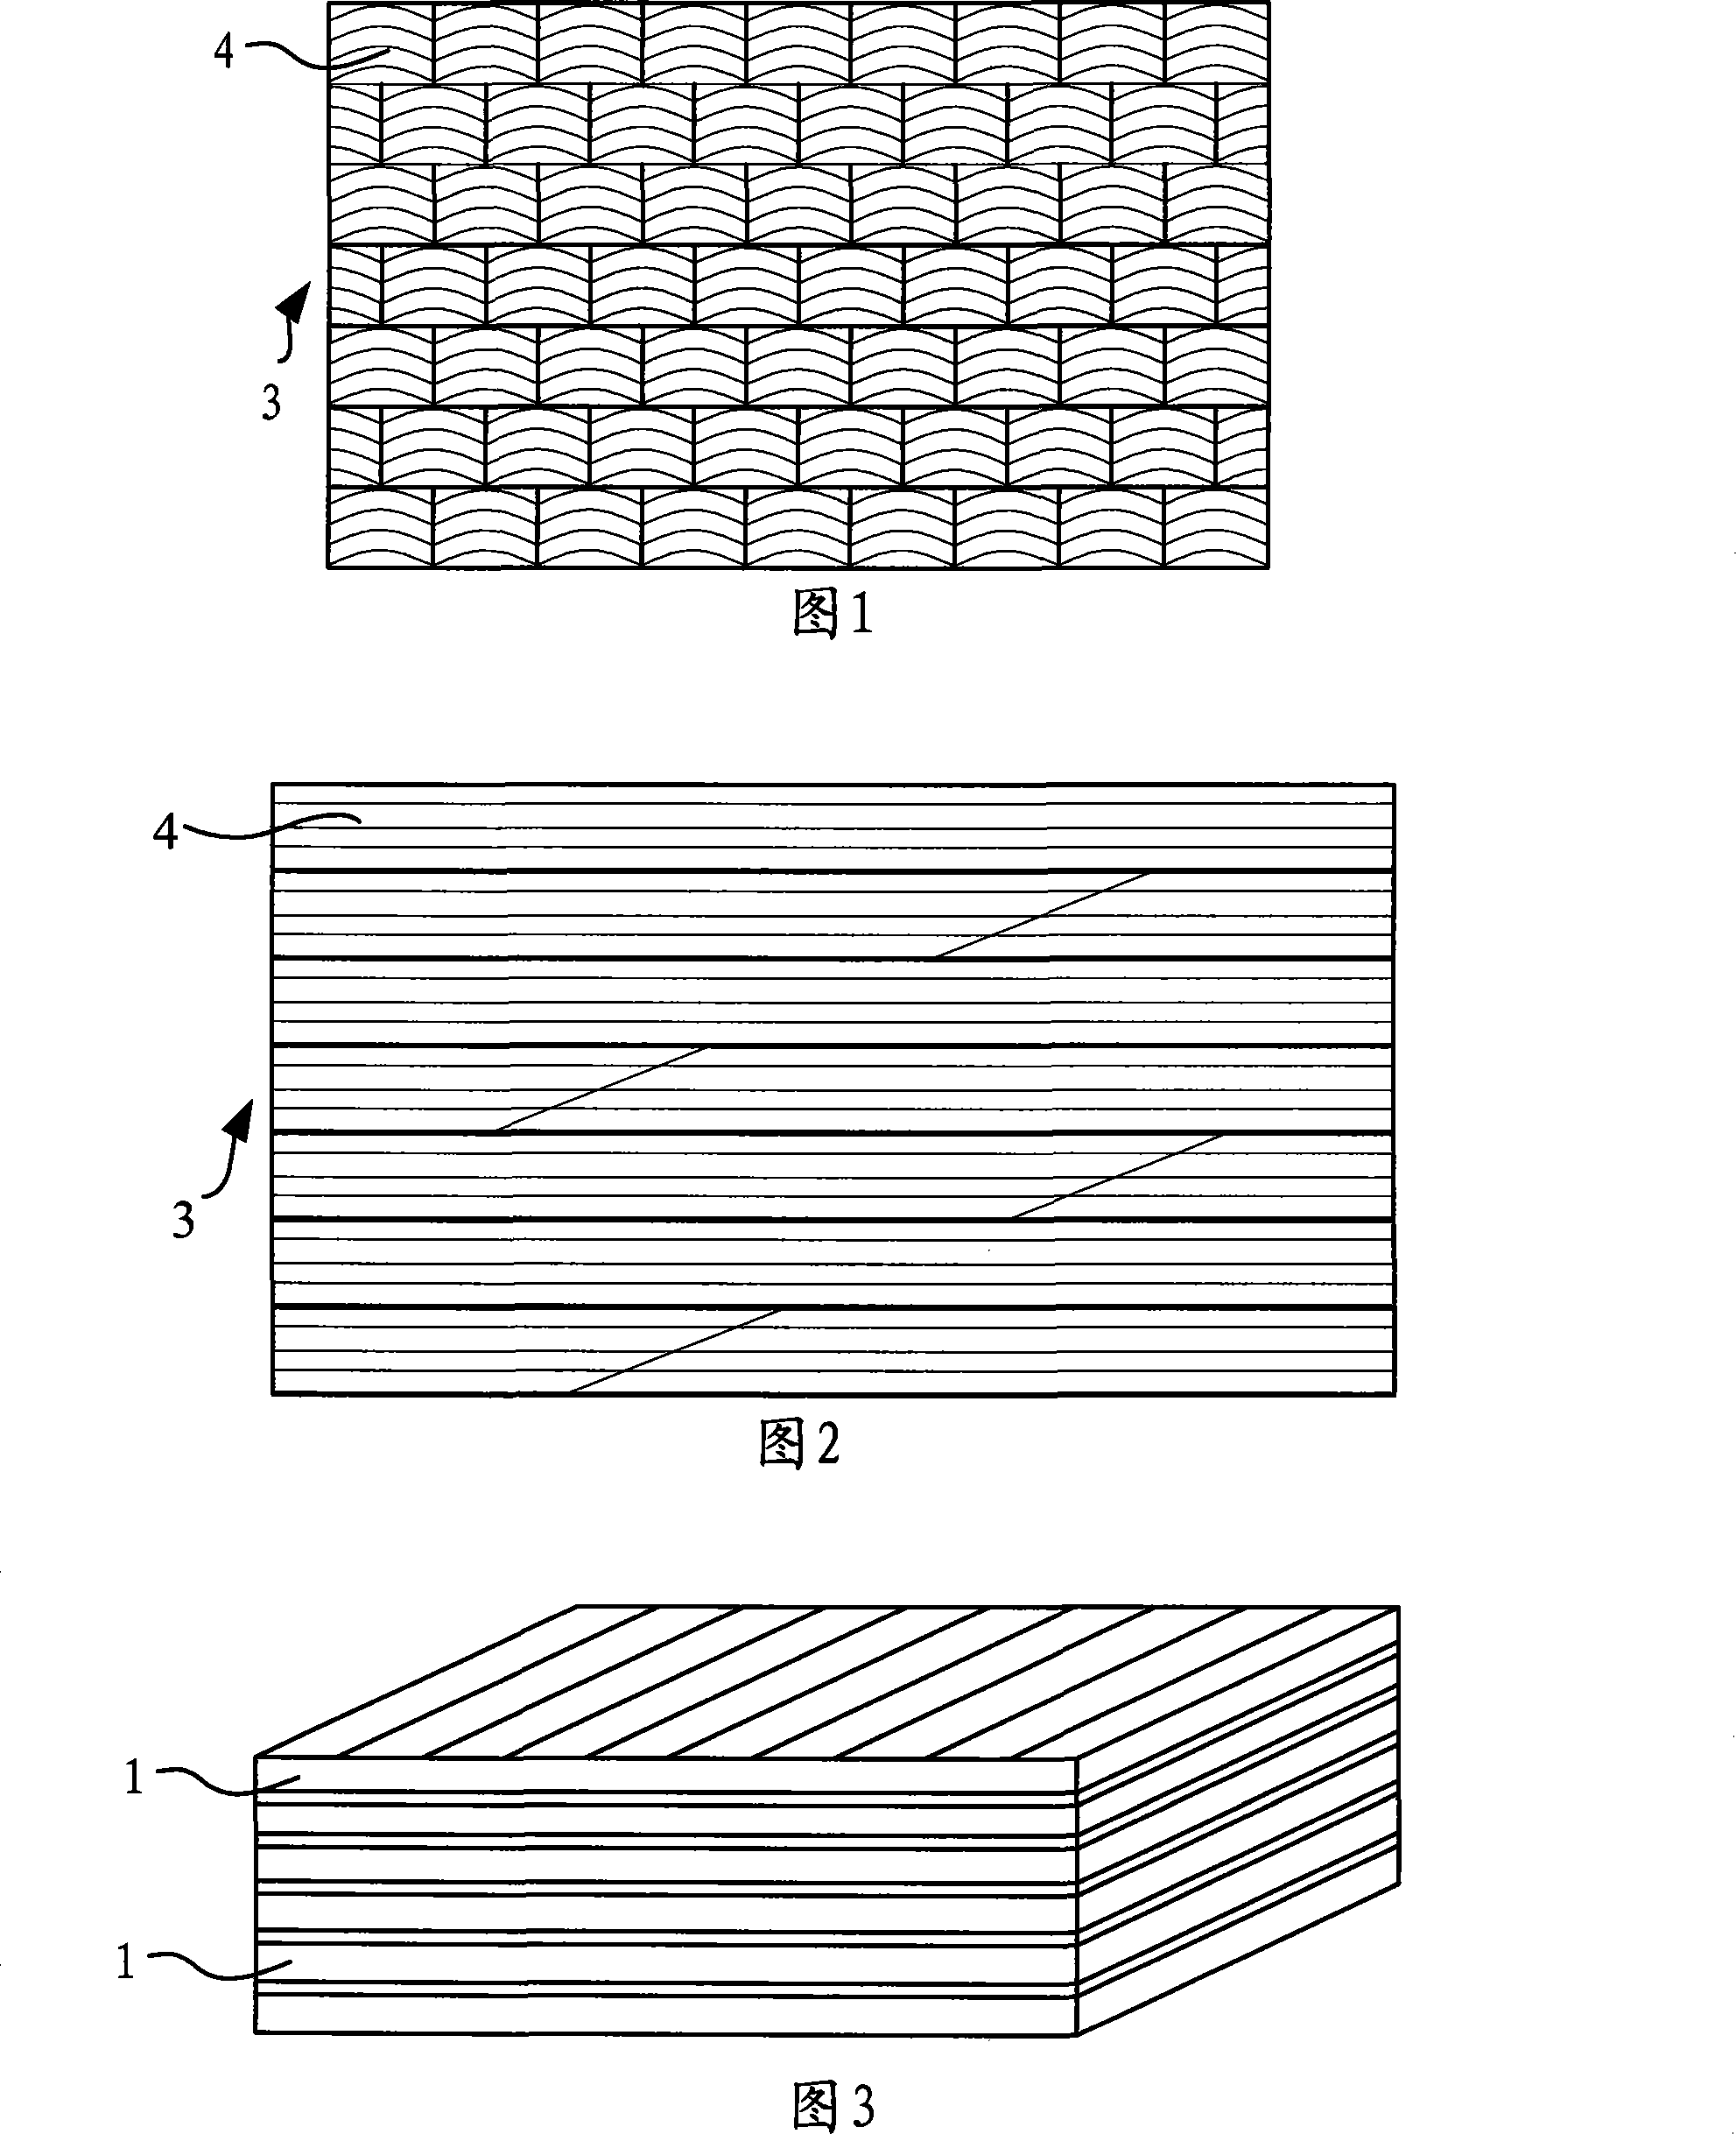 Producing method of spruce laminated layer materials